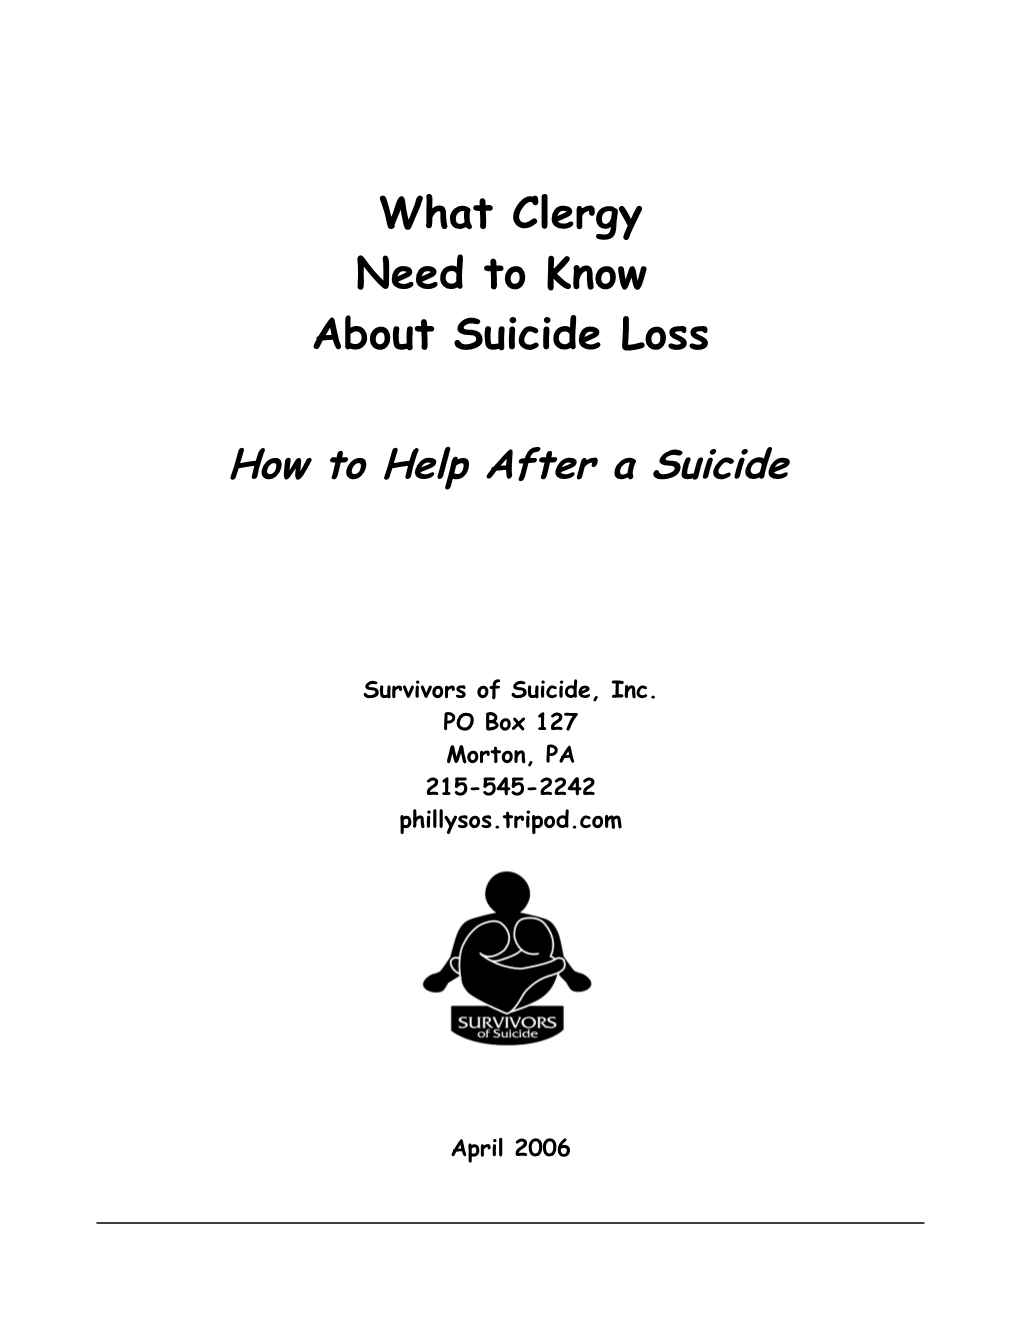 How to Help After a Suicide